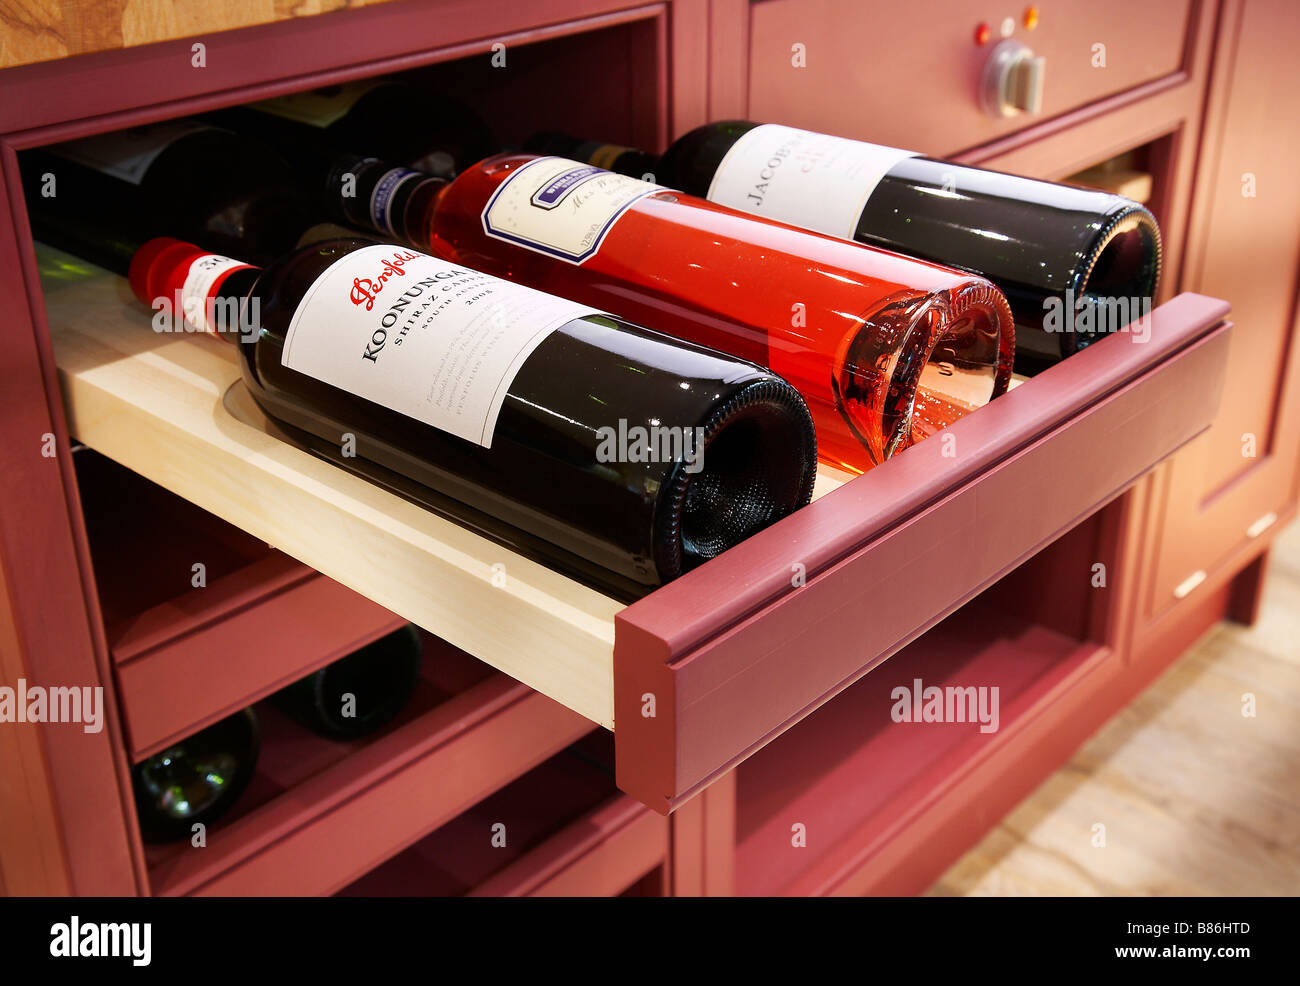 Wine compartment drawer in a kitchen unit. Stock Photo